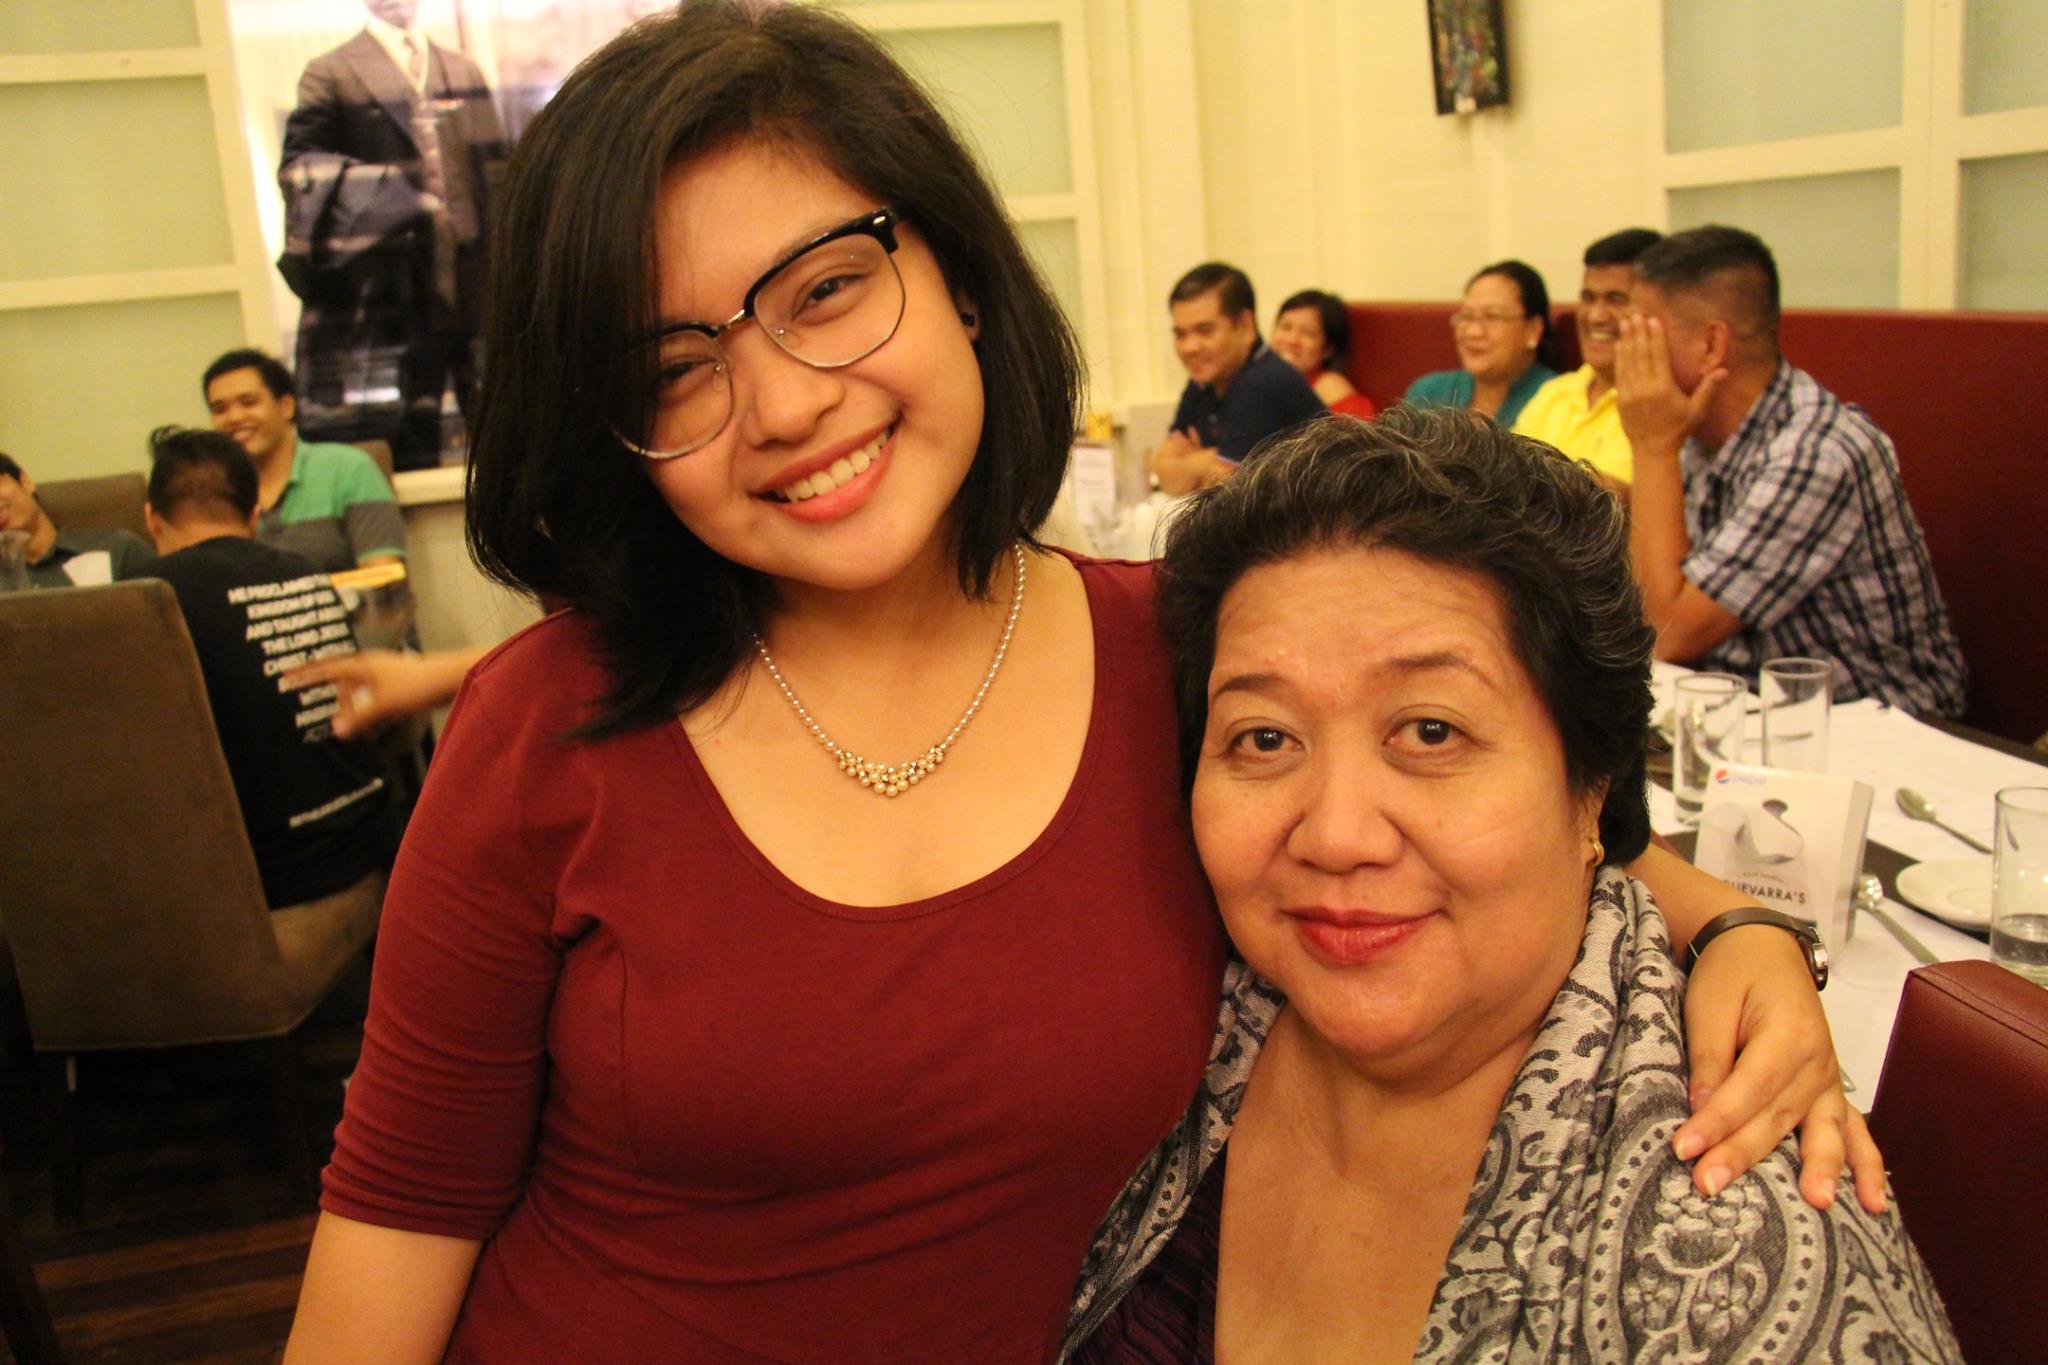 Recipe for Love: A Mother’s Legacy and A Daughter’s Determination | www.familywiseasia.com